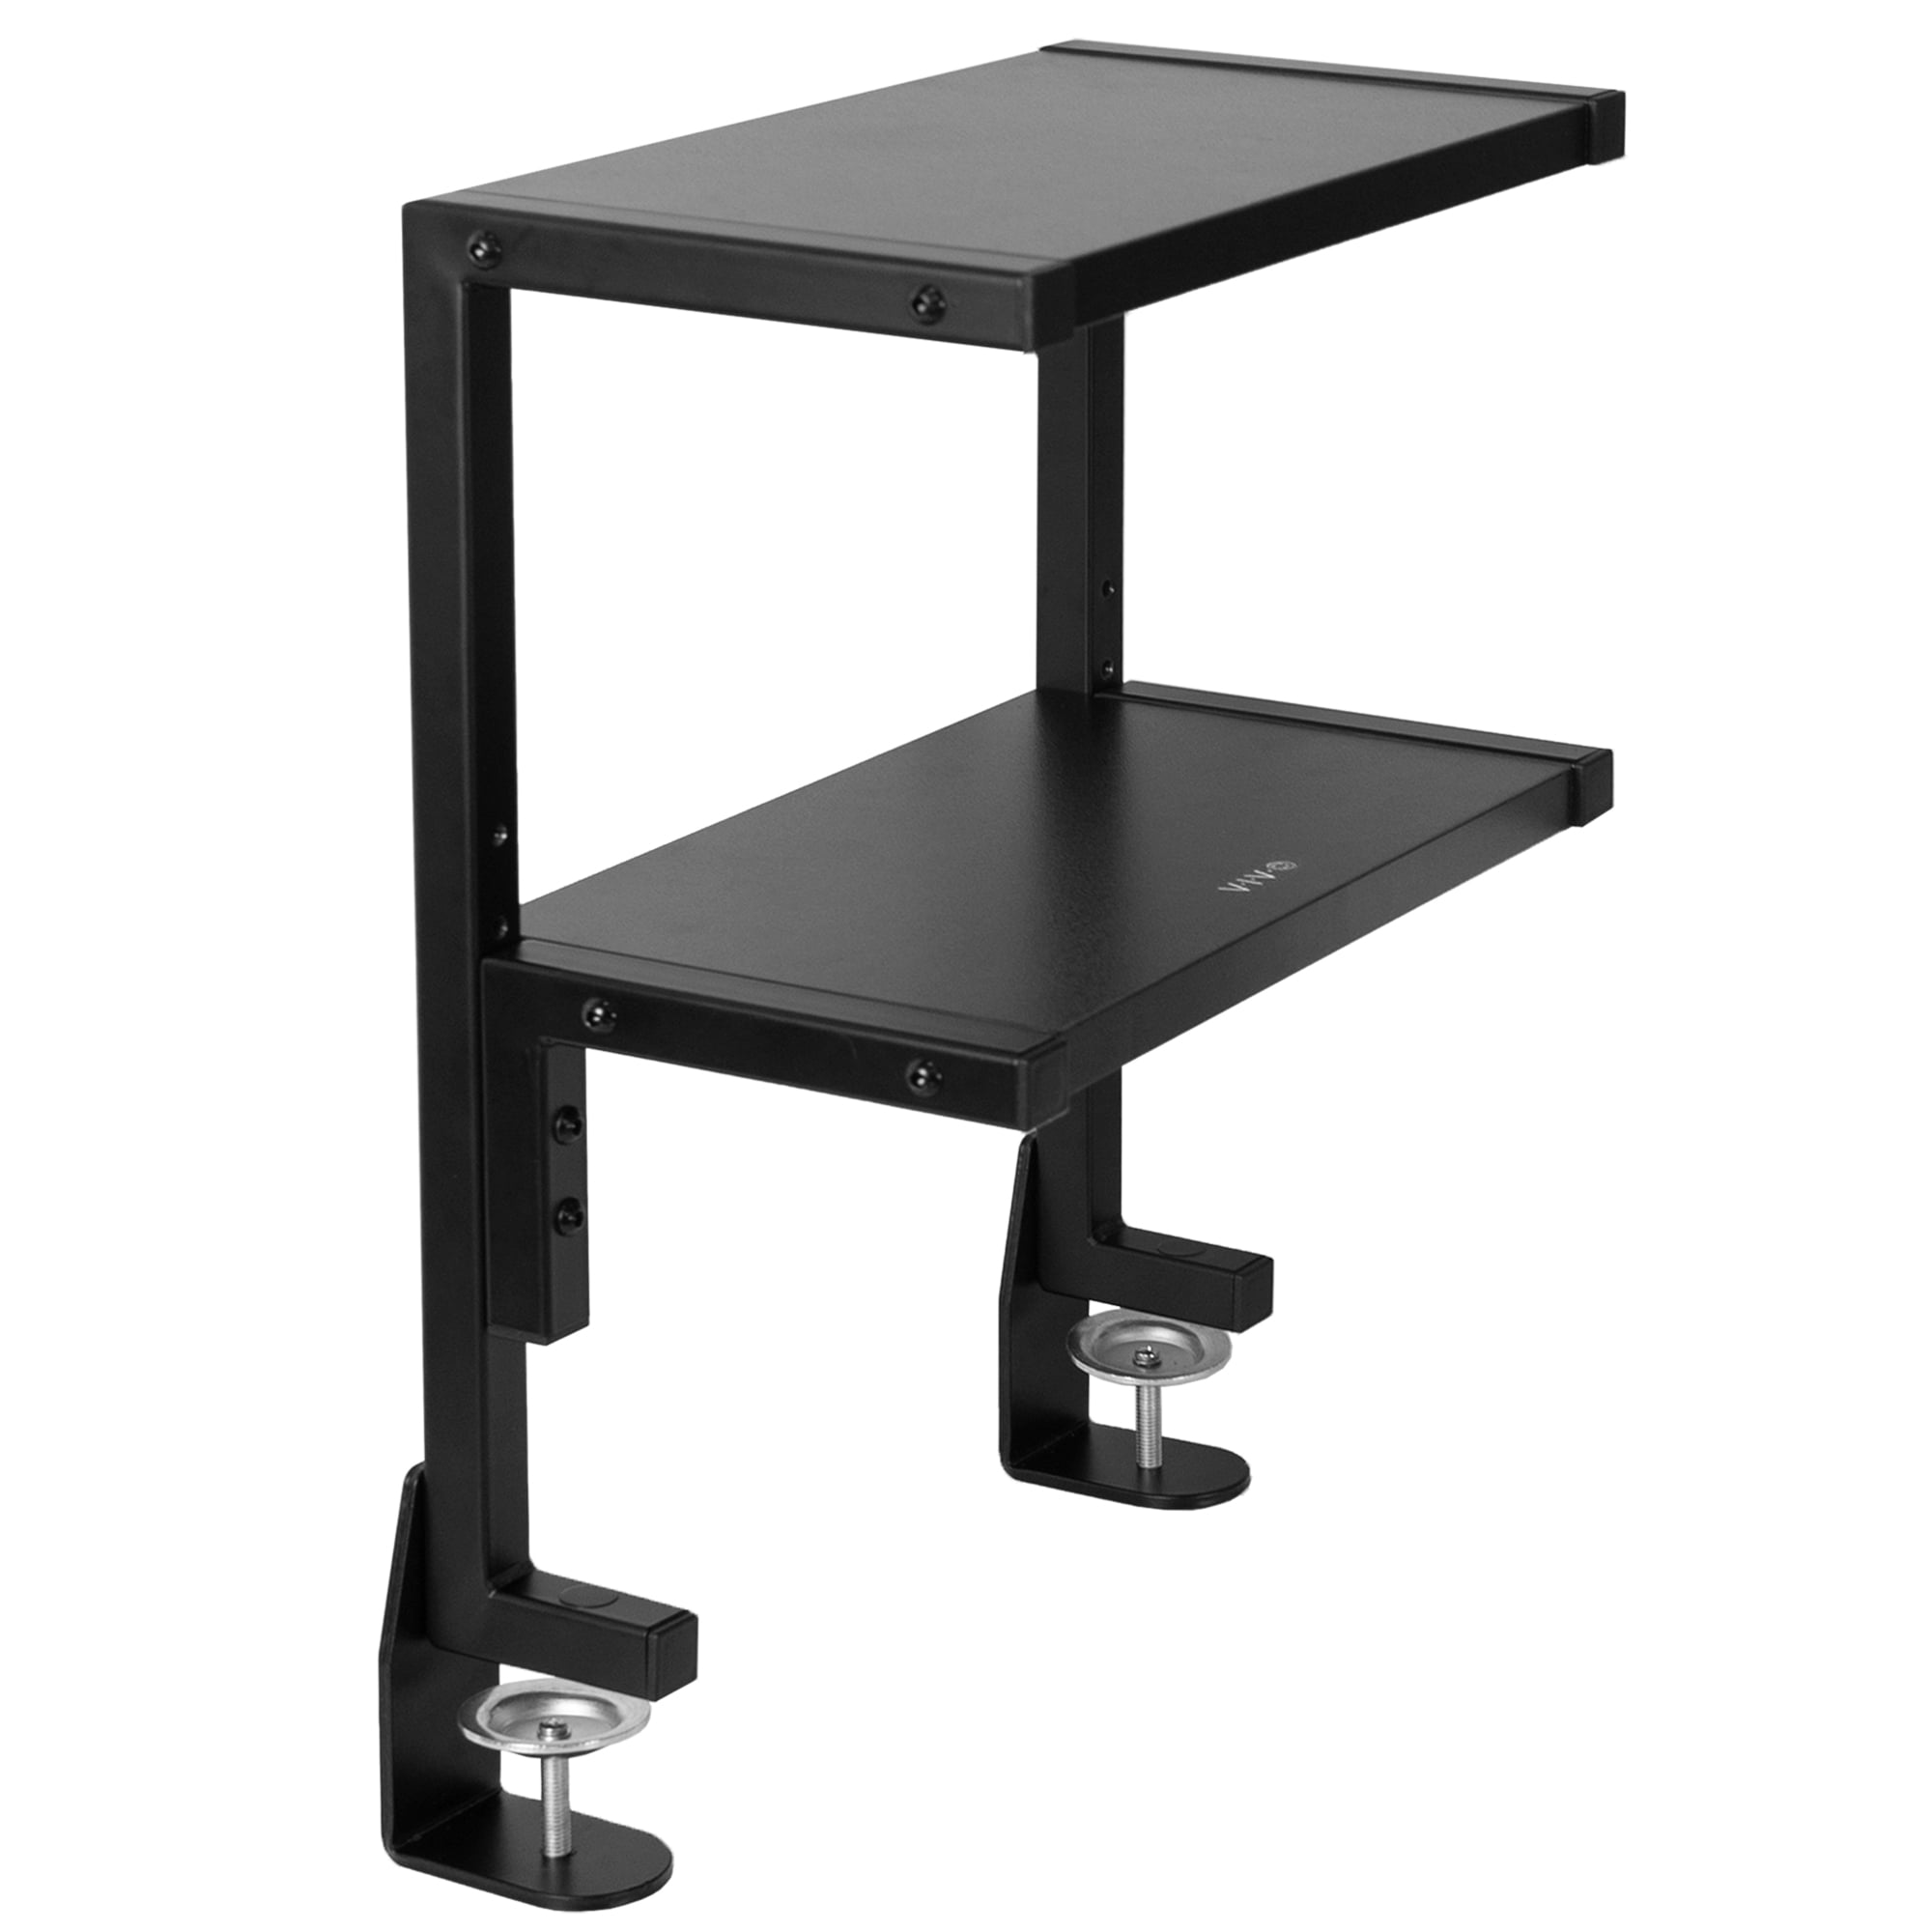 Clamp-on Cable Management Racks – VIVO - desk solutions, screen mounting,  and more